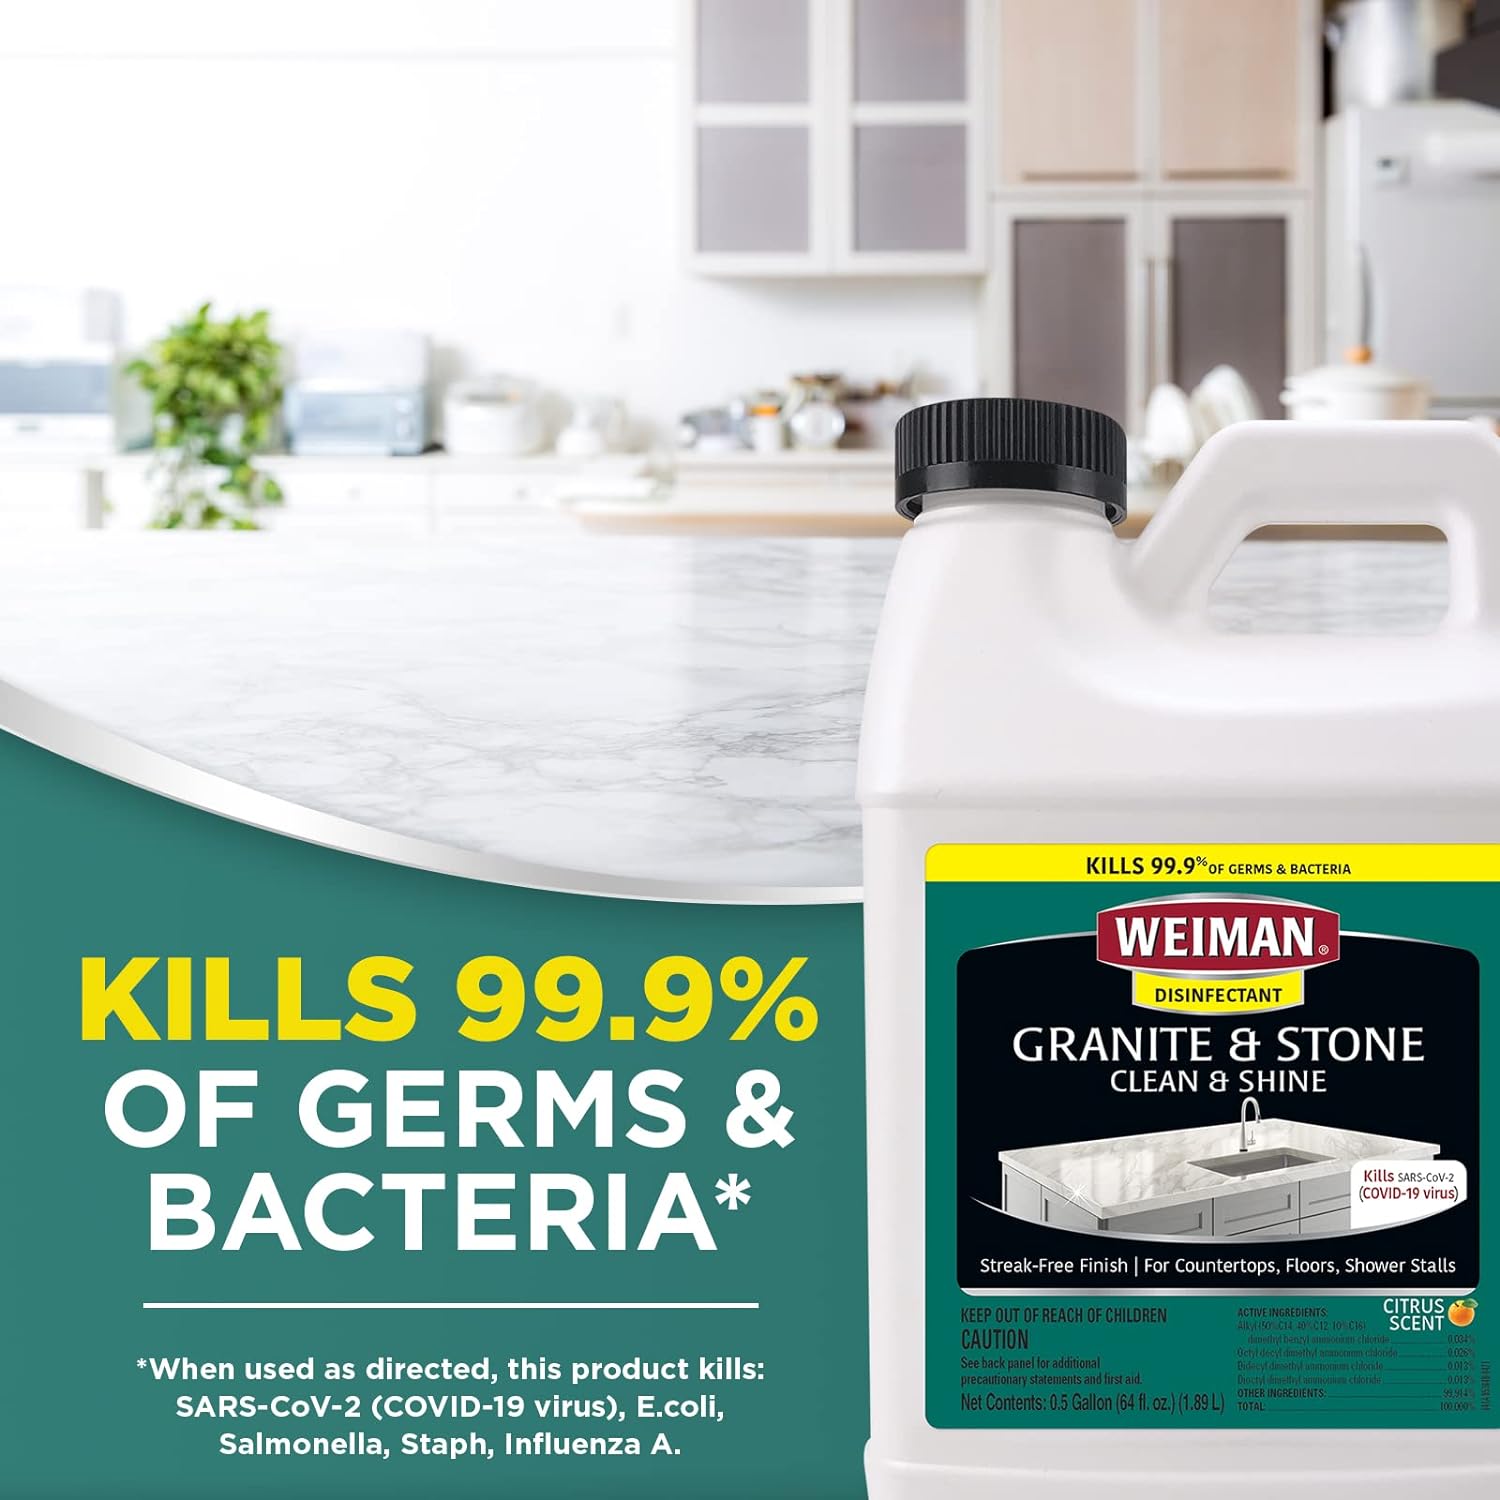 Weiman Disinfecting Granite Cleaner and Polish - 64 Ounce (2 Pack) Safely Cleans and Shines Granite Marble Quartz Quartzite Slate Limestone Corian Laminate Tile Countertop : Health & Household